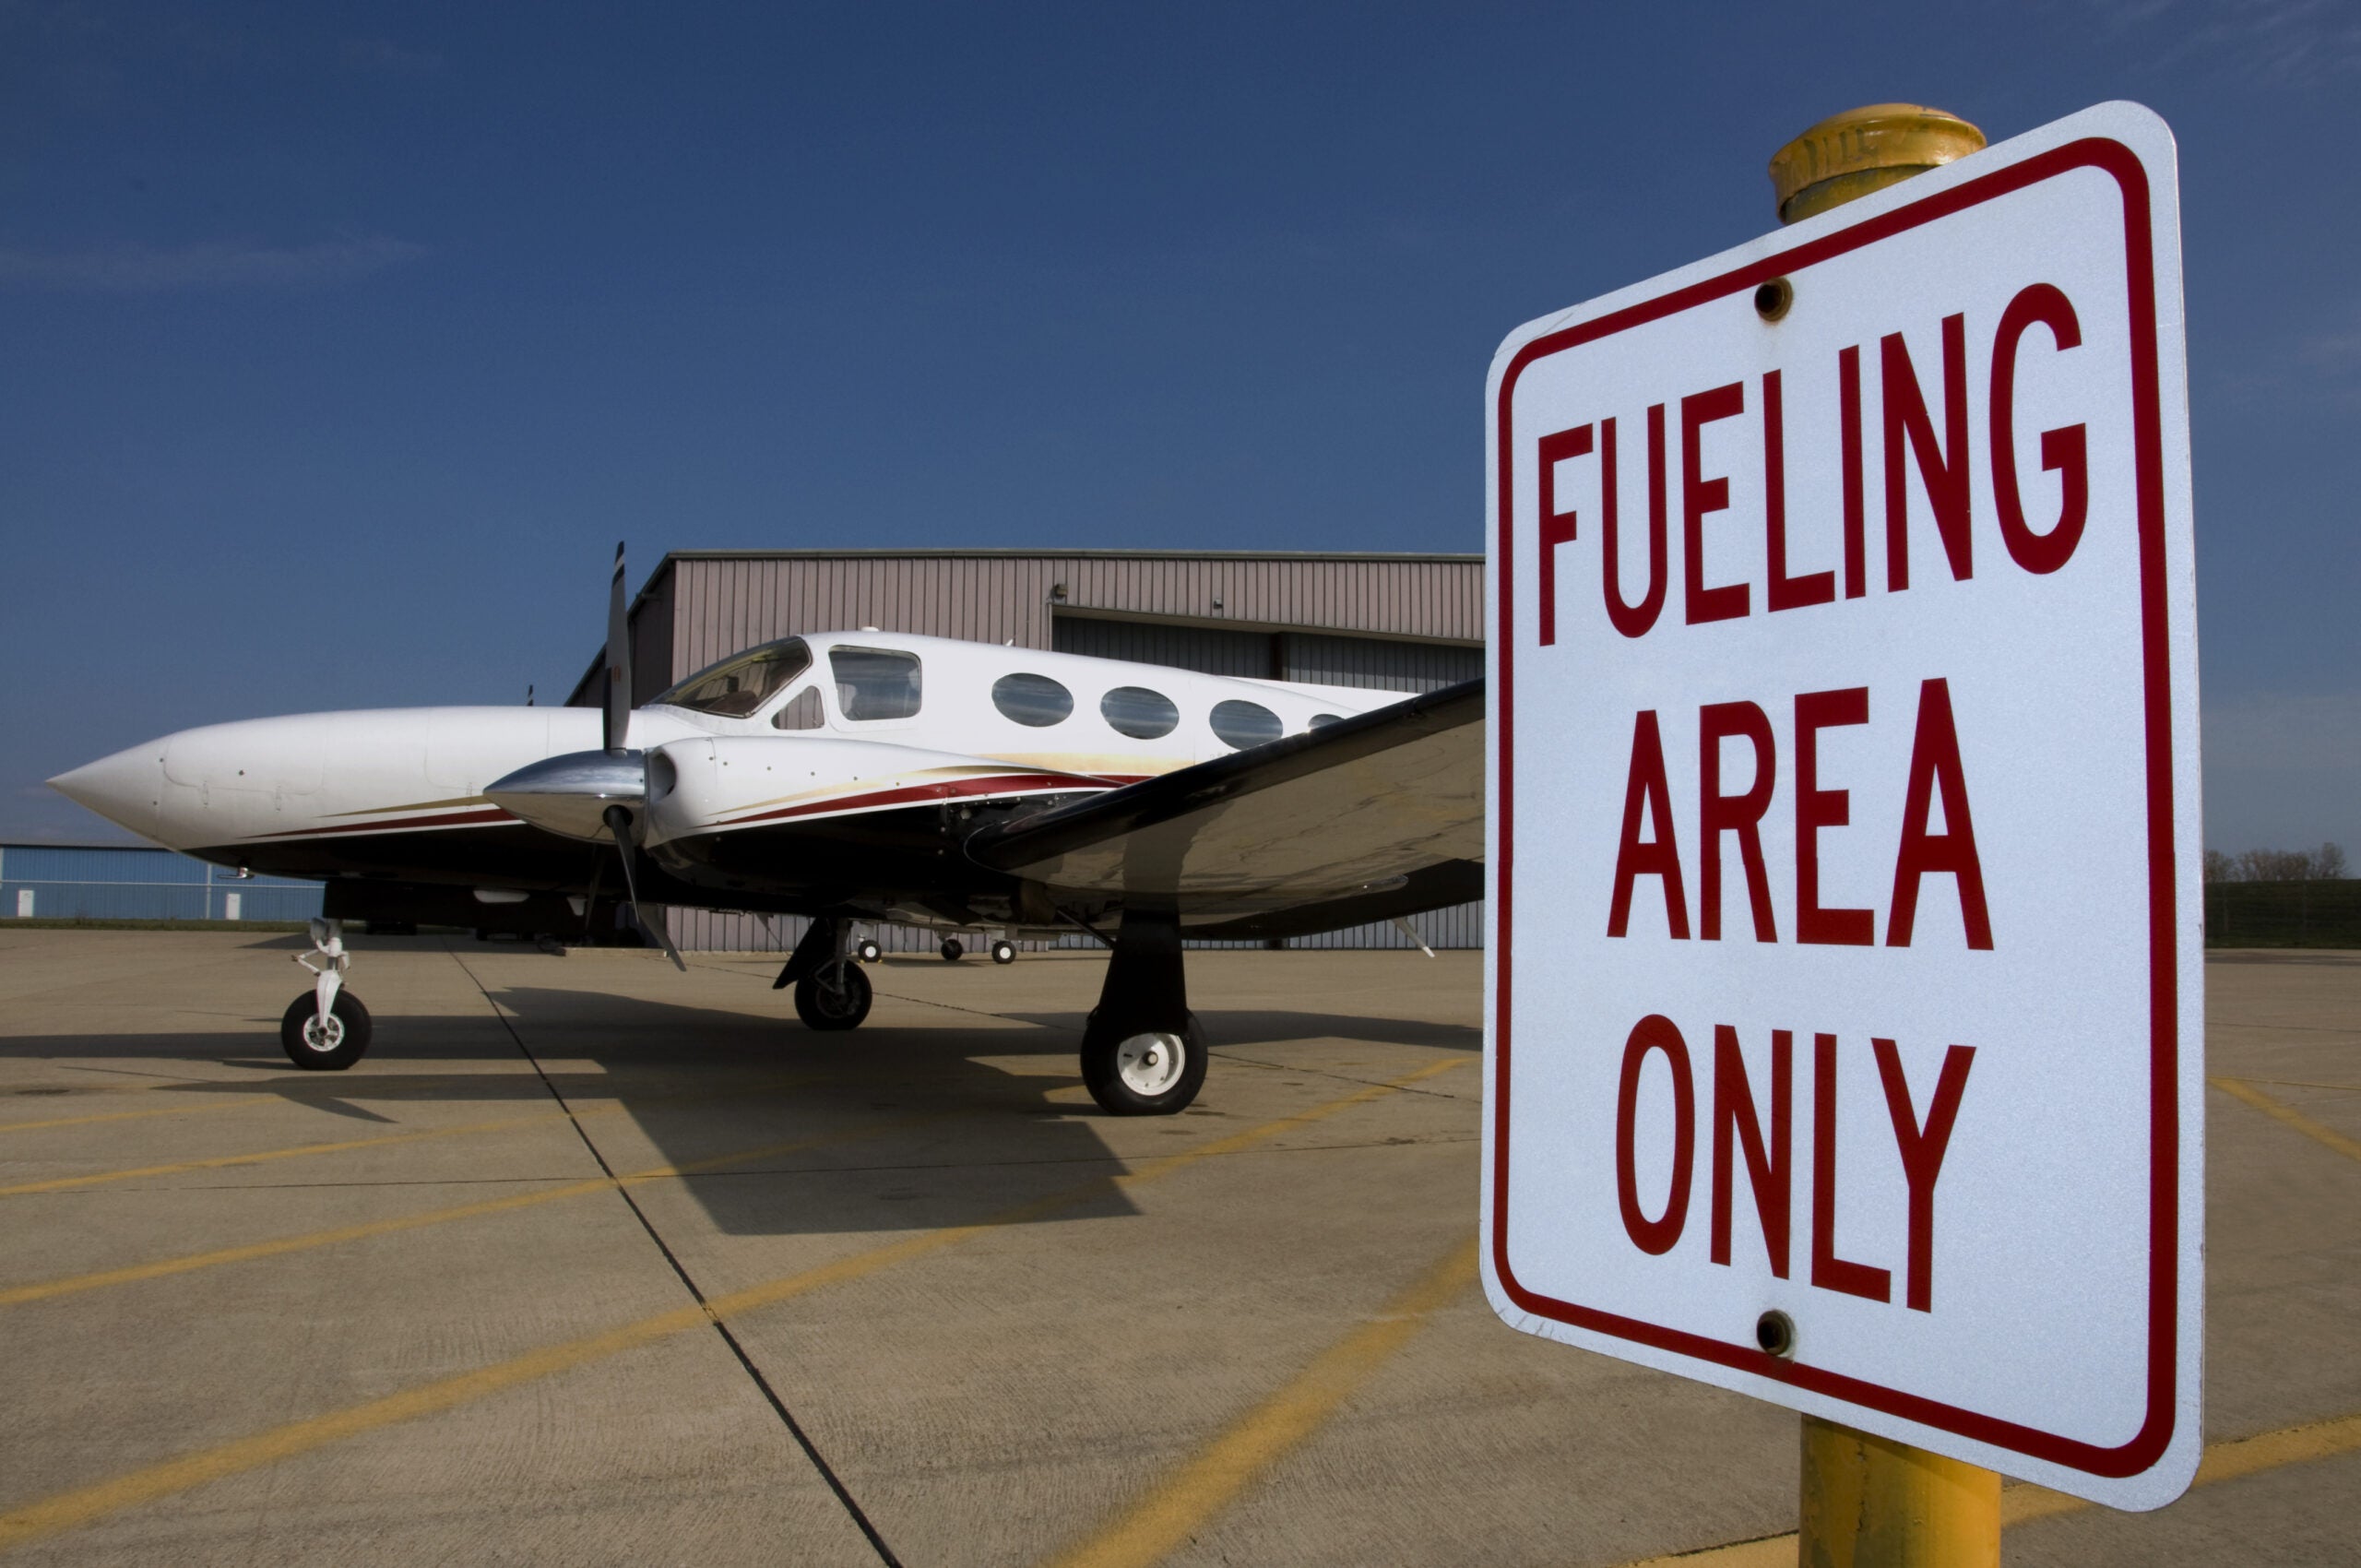 Can You Put Automobile Gas in Your Aircraft?